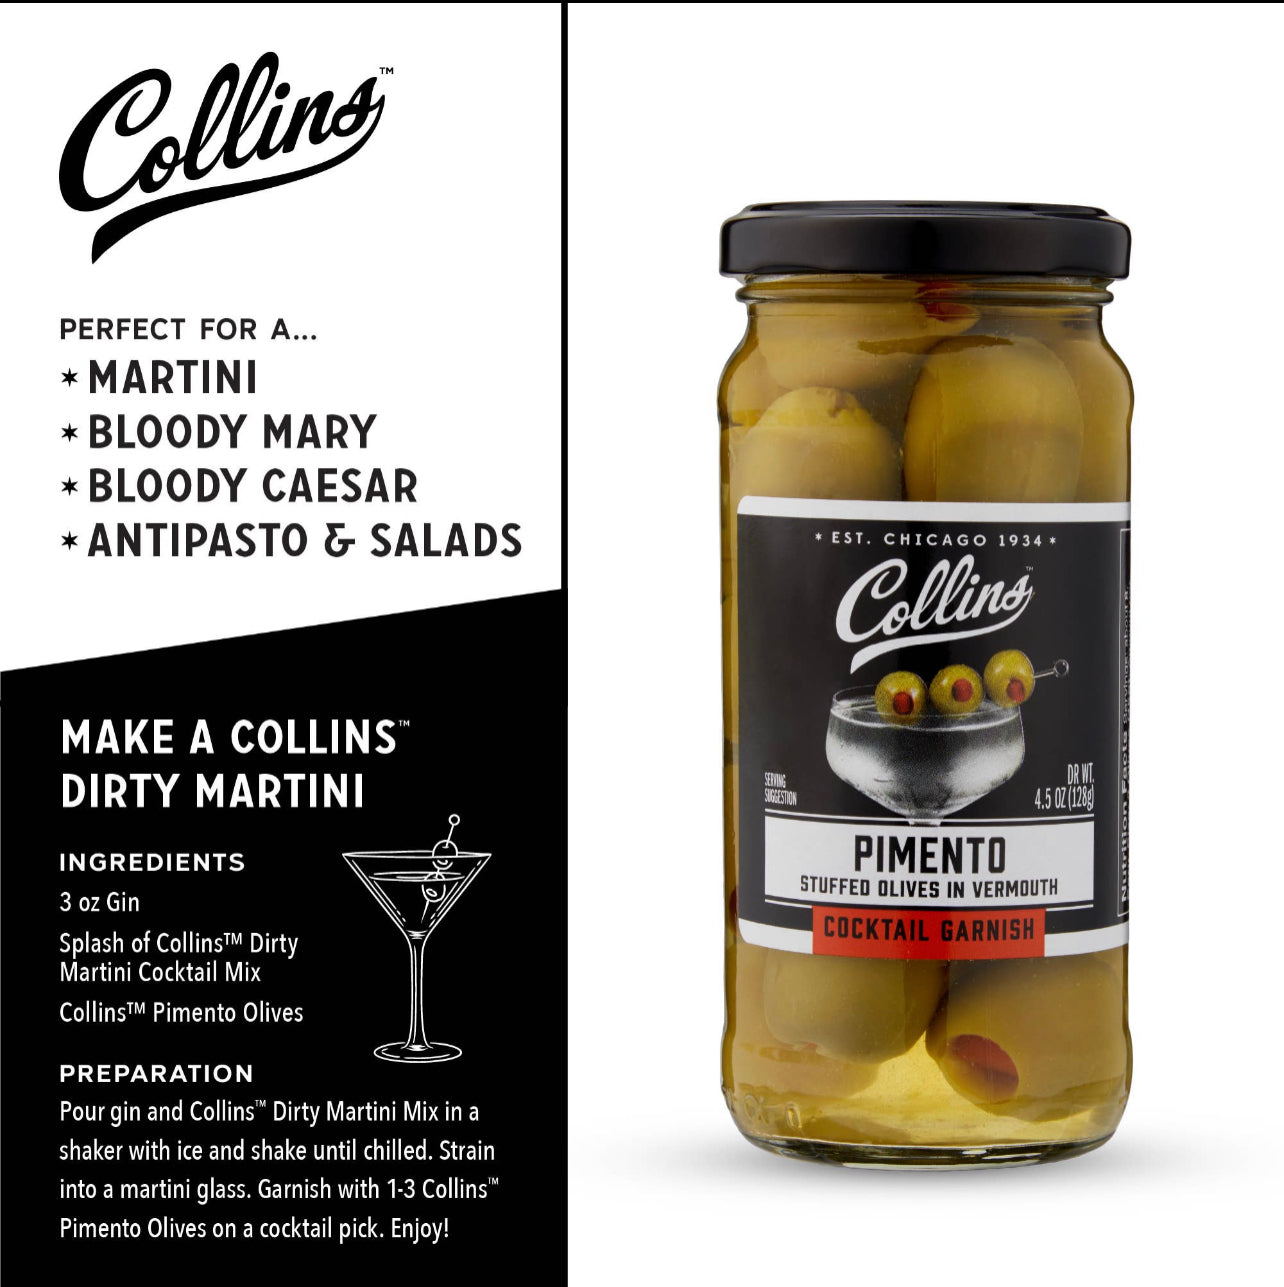 jar of pimento stuffed olives in vermouth with a recipe on how to make a Collins Dirty Martini and suggestions for using the olives including martini, bloody mary, bloody caesar, antipasto and salads